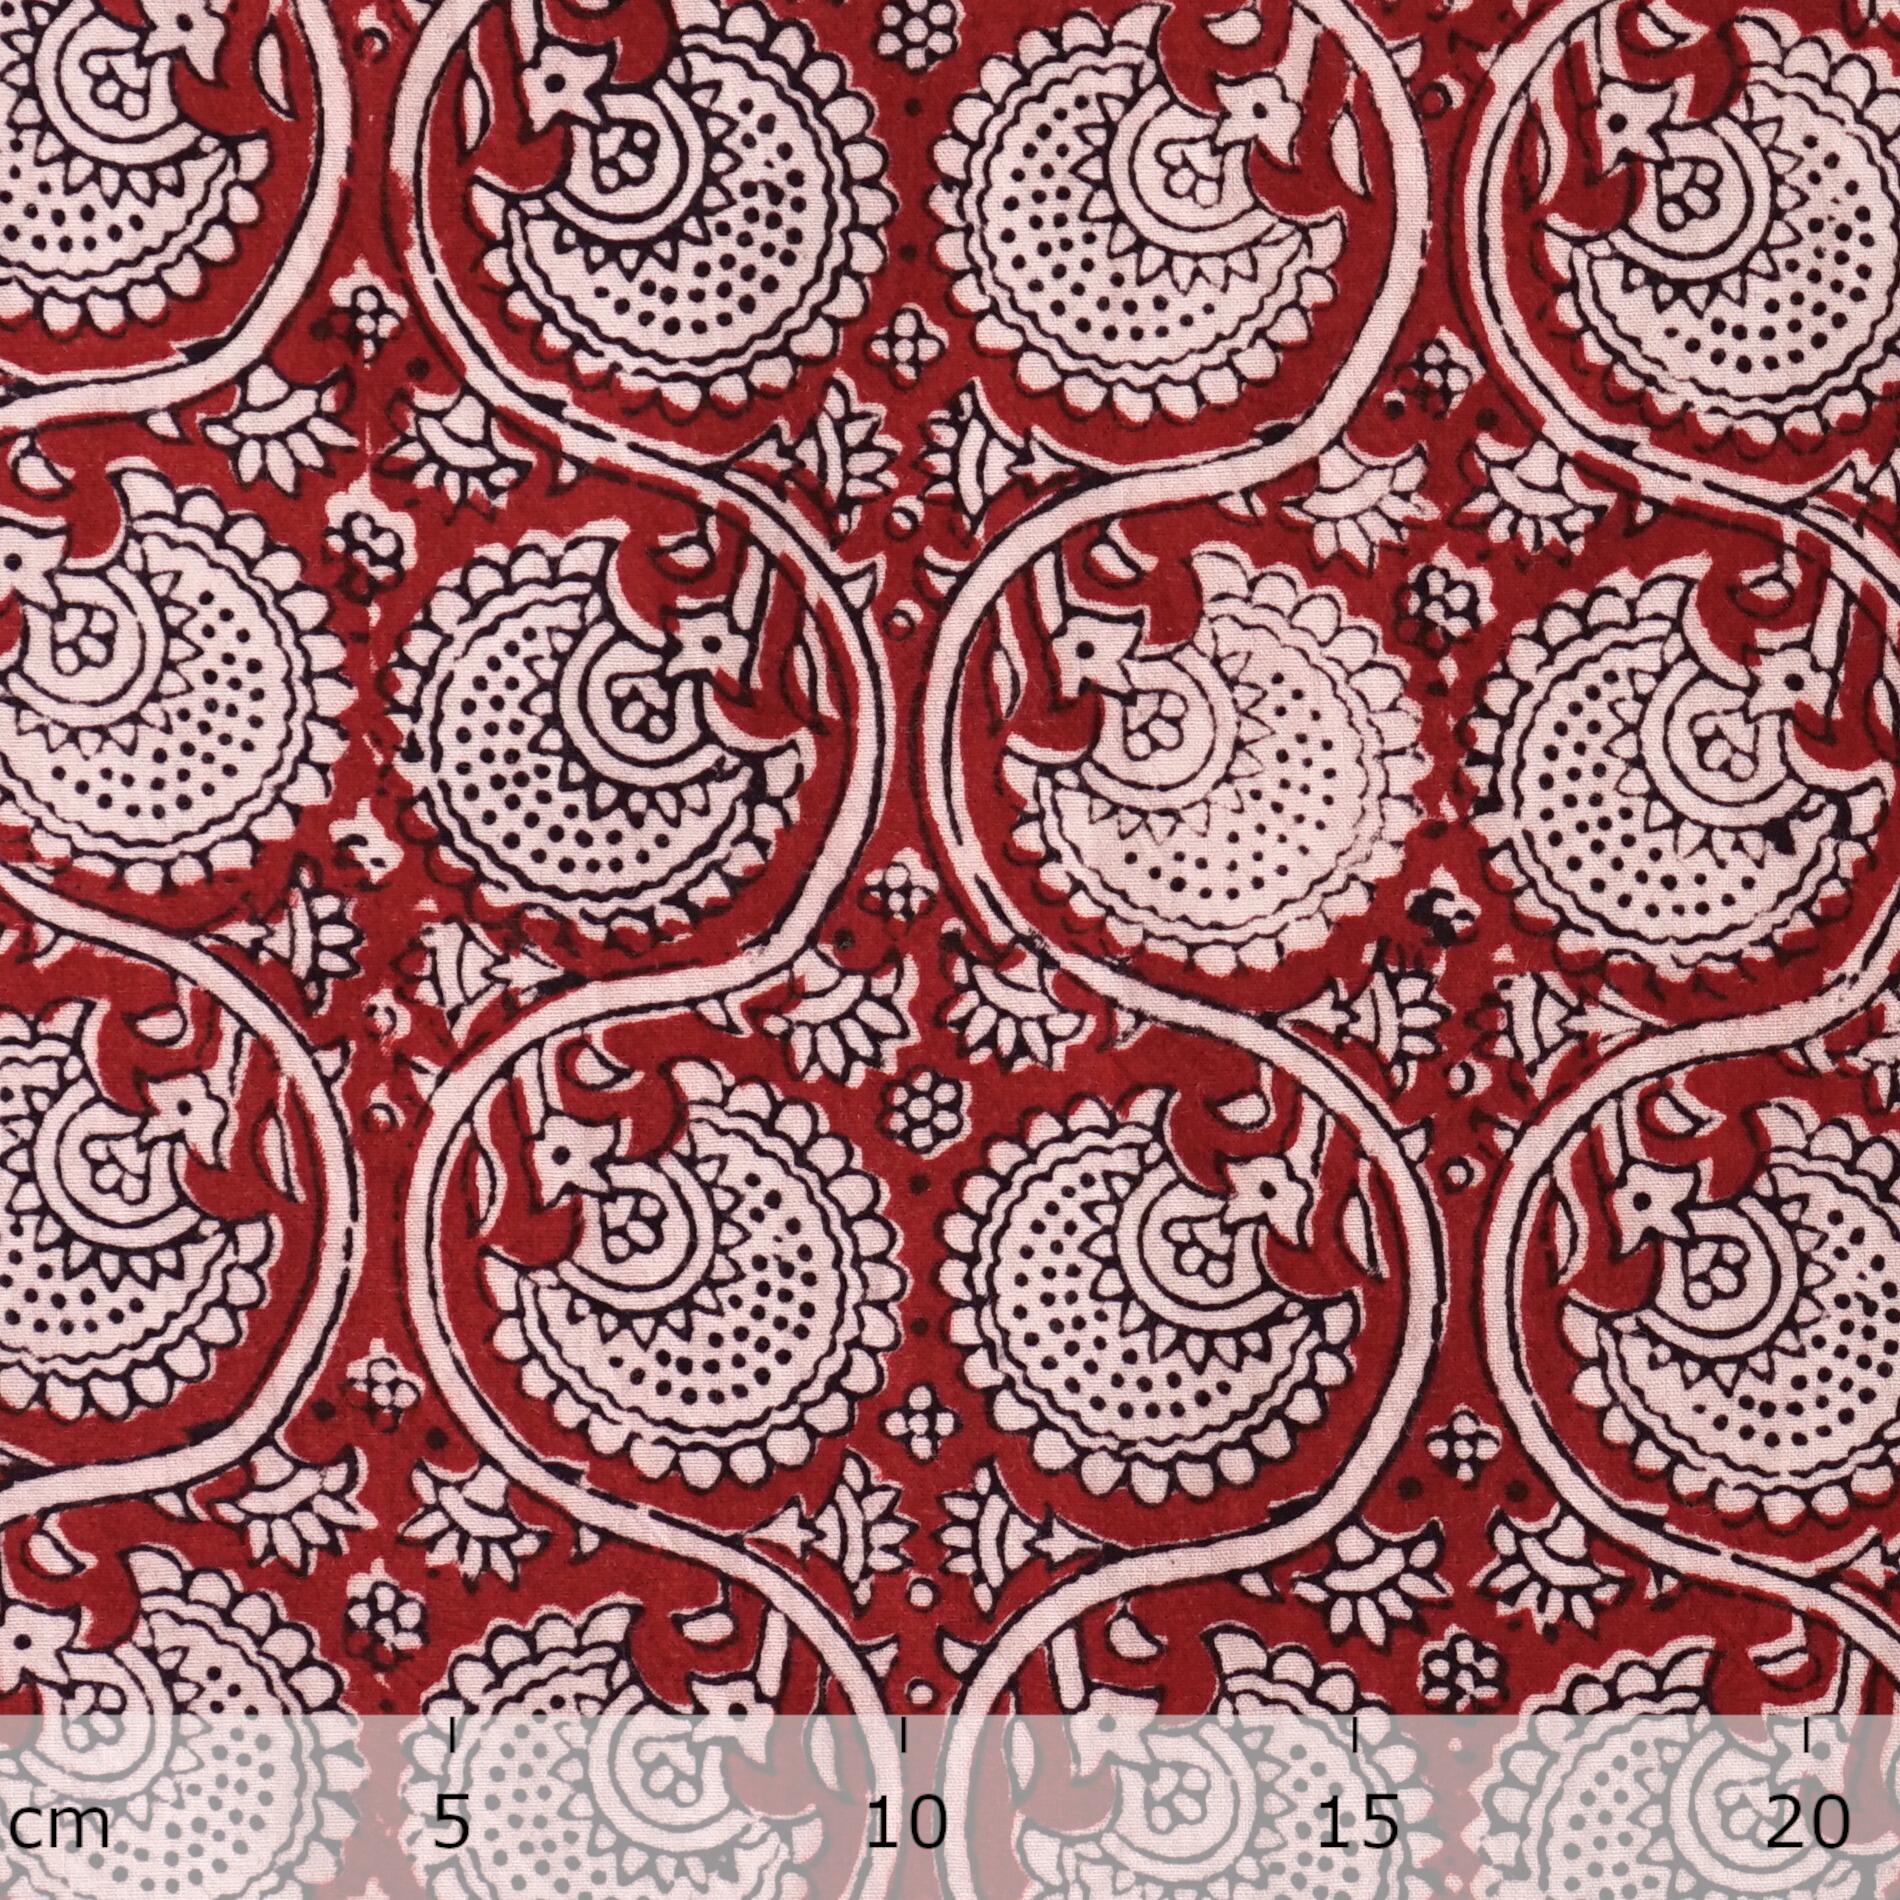 100% Block-Printed Cotton Fabric From India - Idle Moments Design - Iron Rust Black & Alizarin Red Dyes - Ruler